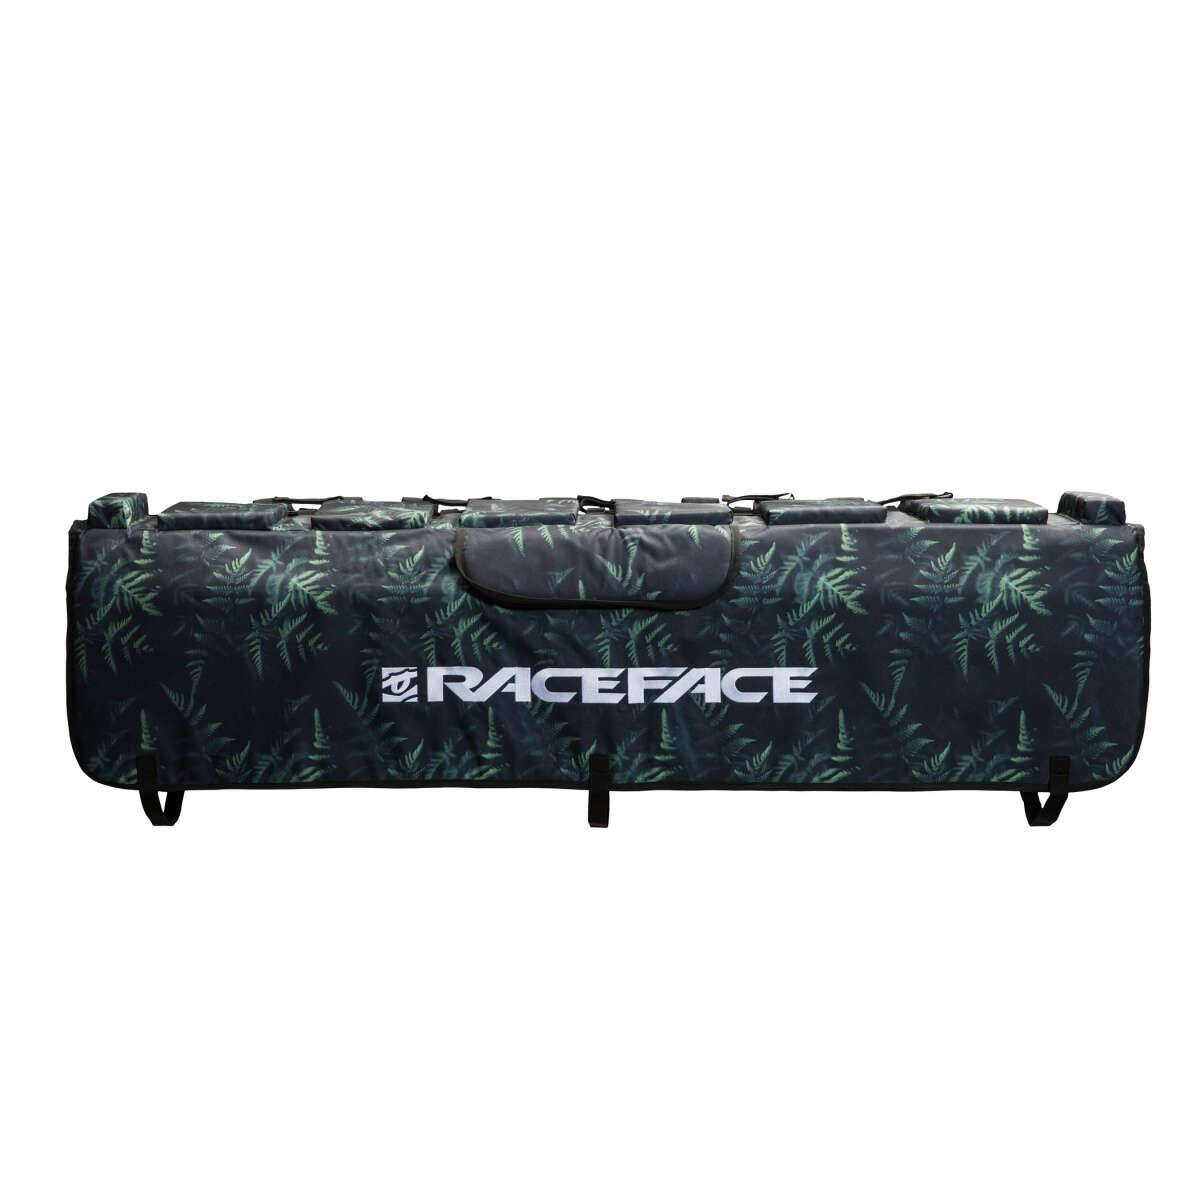 Race Face Tailgate Pad Tailgate Pad Inferno